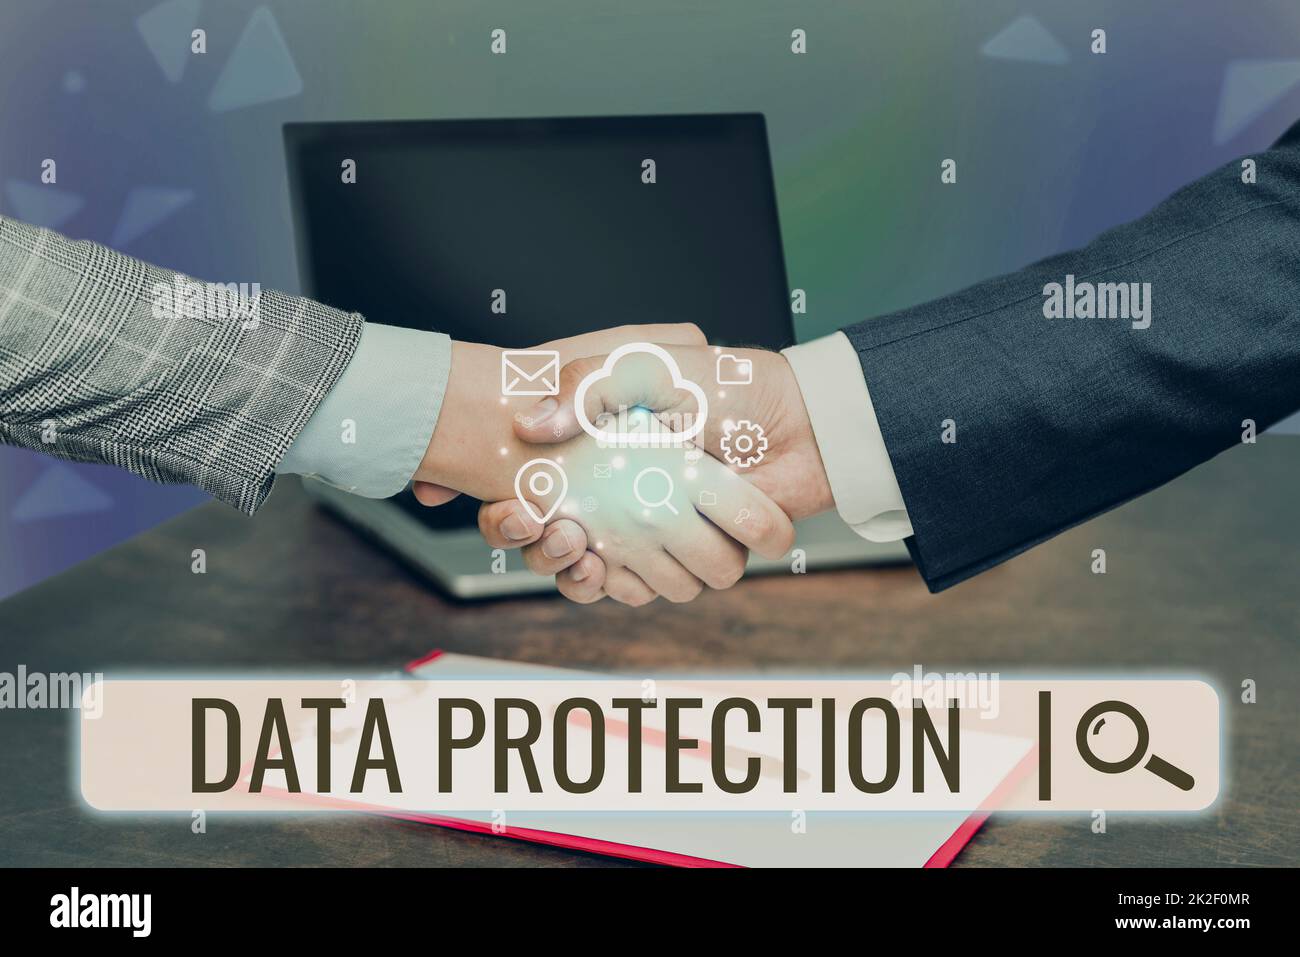 Inspiration showing sign Data Protection. Business showcase Protect IP addresses and personal data from harmful software Hands Shaking Signing Contract Unlocking New Futuristic Technologies. Stock Photo